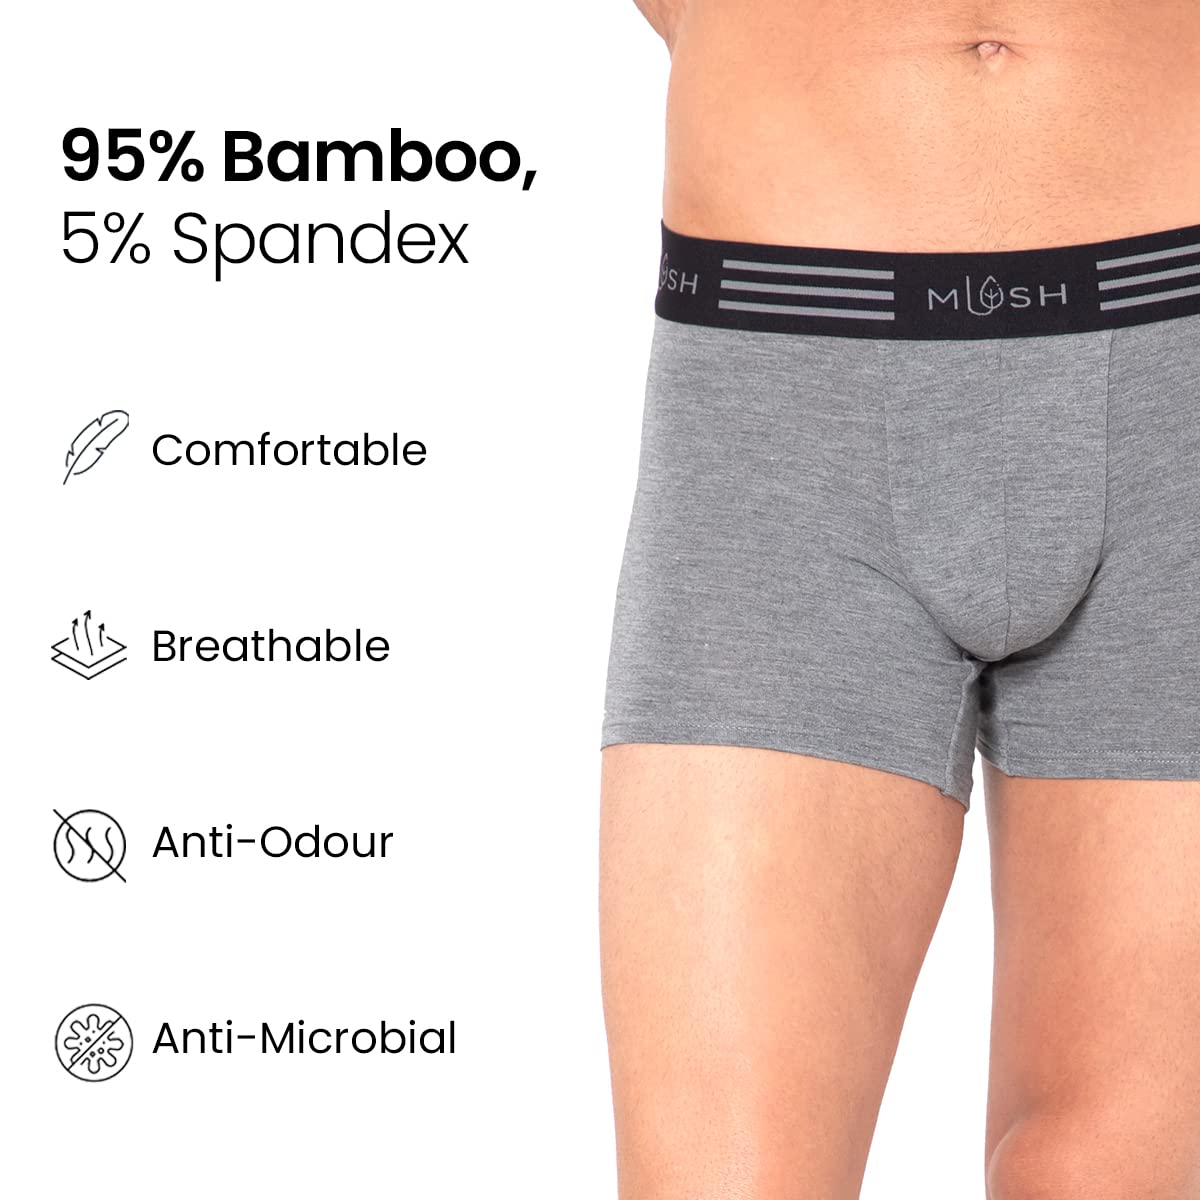 Mush Ultra Soft, Breathable, Feather Light Men's Bamboo Trunk || Naturally Anti-Odor and Anti-Microbial Bamboo Innerwear (XL, Grey)